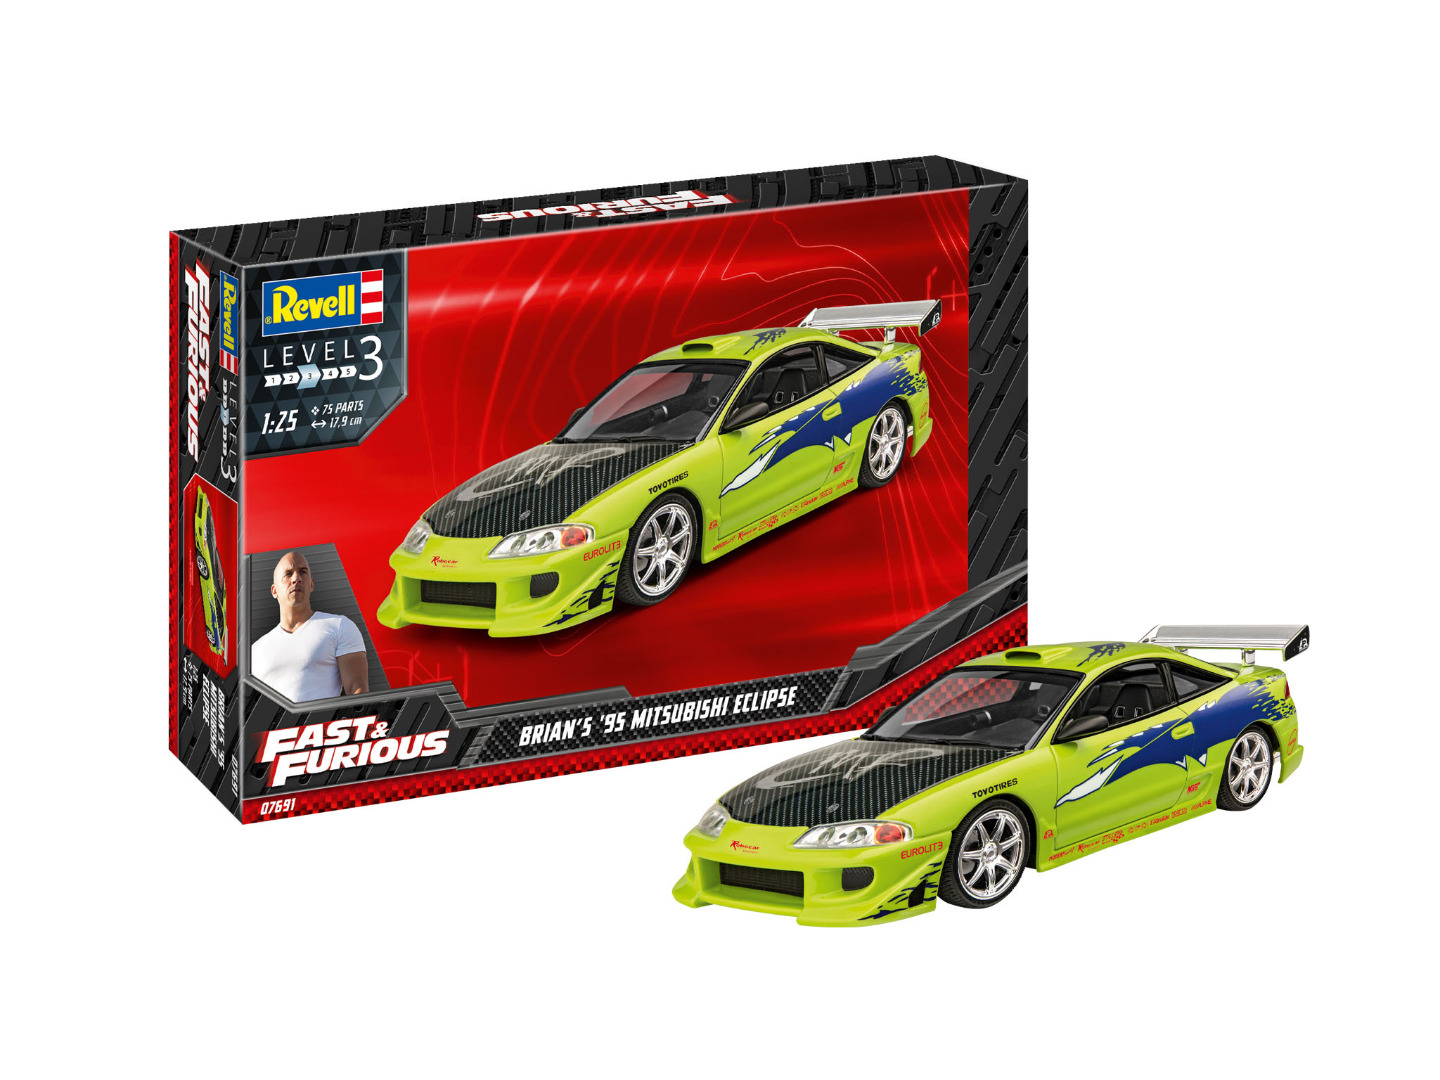 Revell Model Kit Fast & Furious Brian's 1995 Mitsubishi Eclipse Scale 1:25